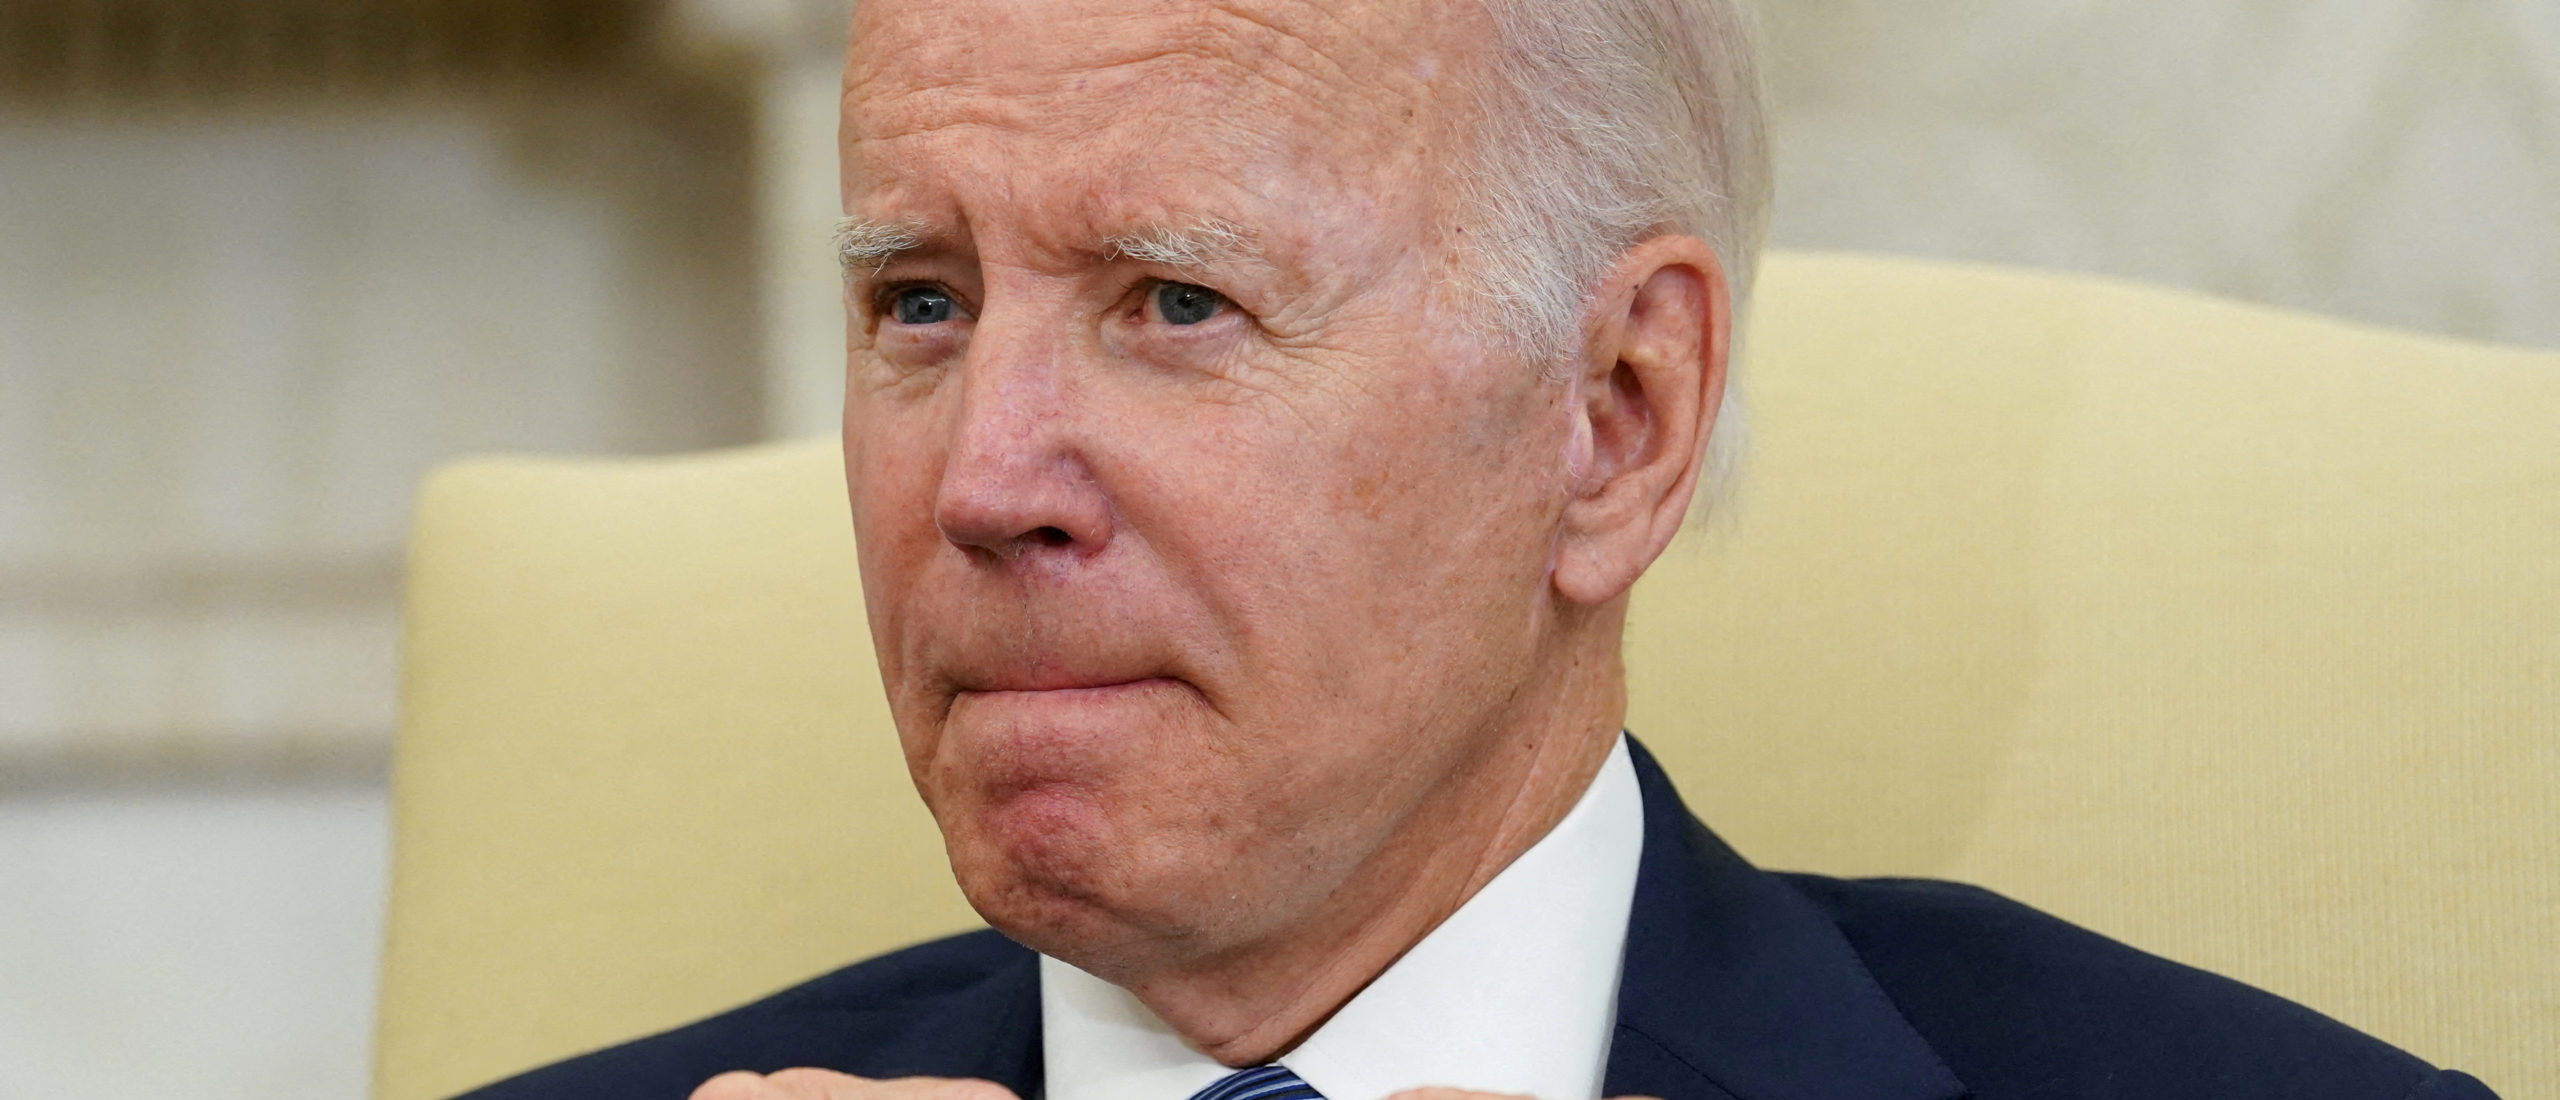 DANIEL: Cheering On Biden’s Downfall Could Come Back To Haunt Republicans